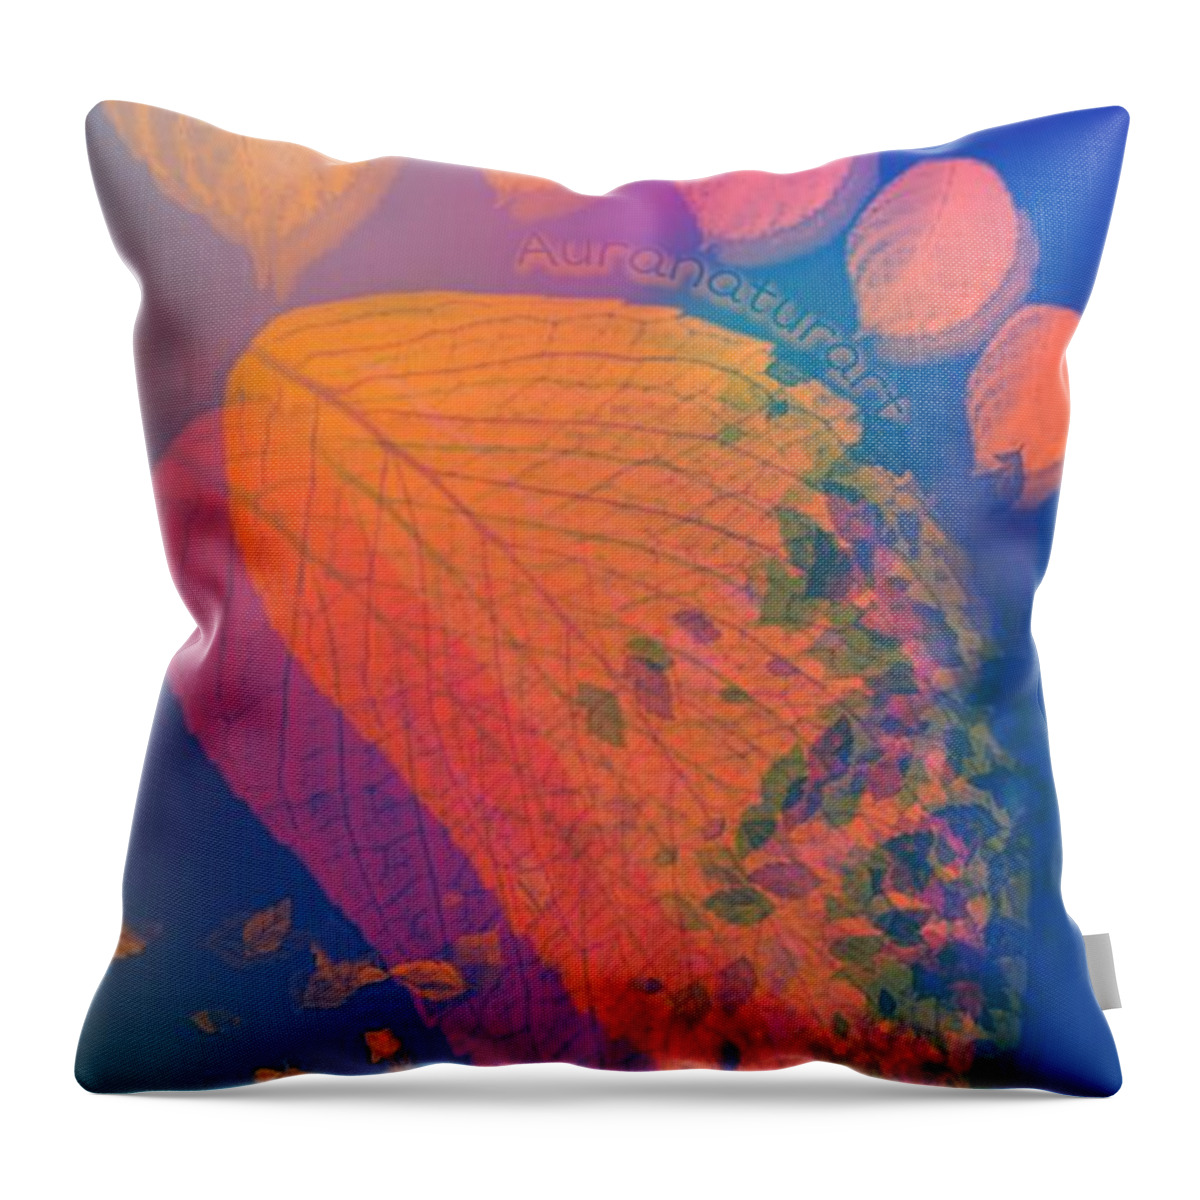 Footprints Throw Pillow featuring the photograph FOOTPRINTS Happy Colors by Auranatura Art